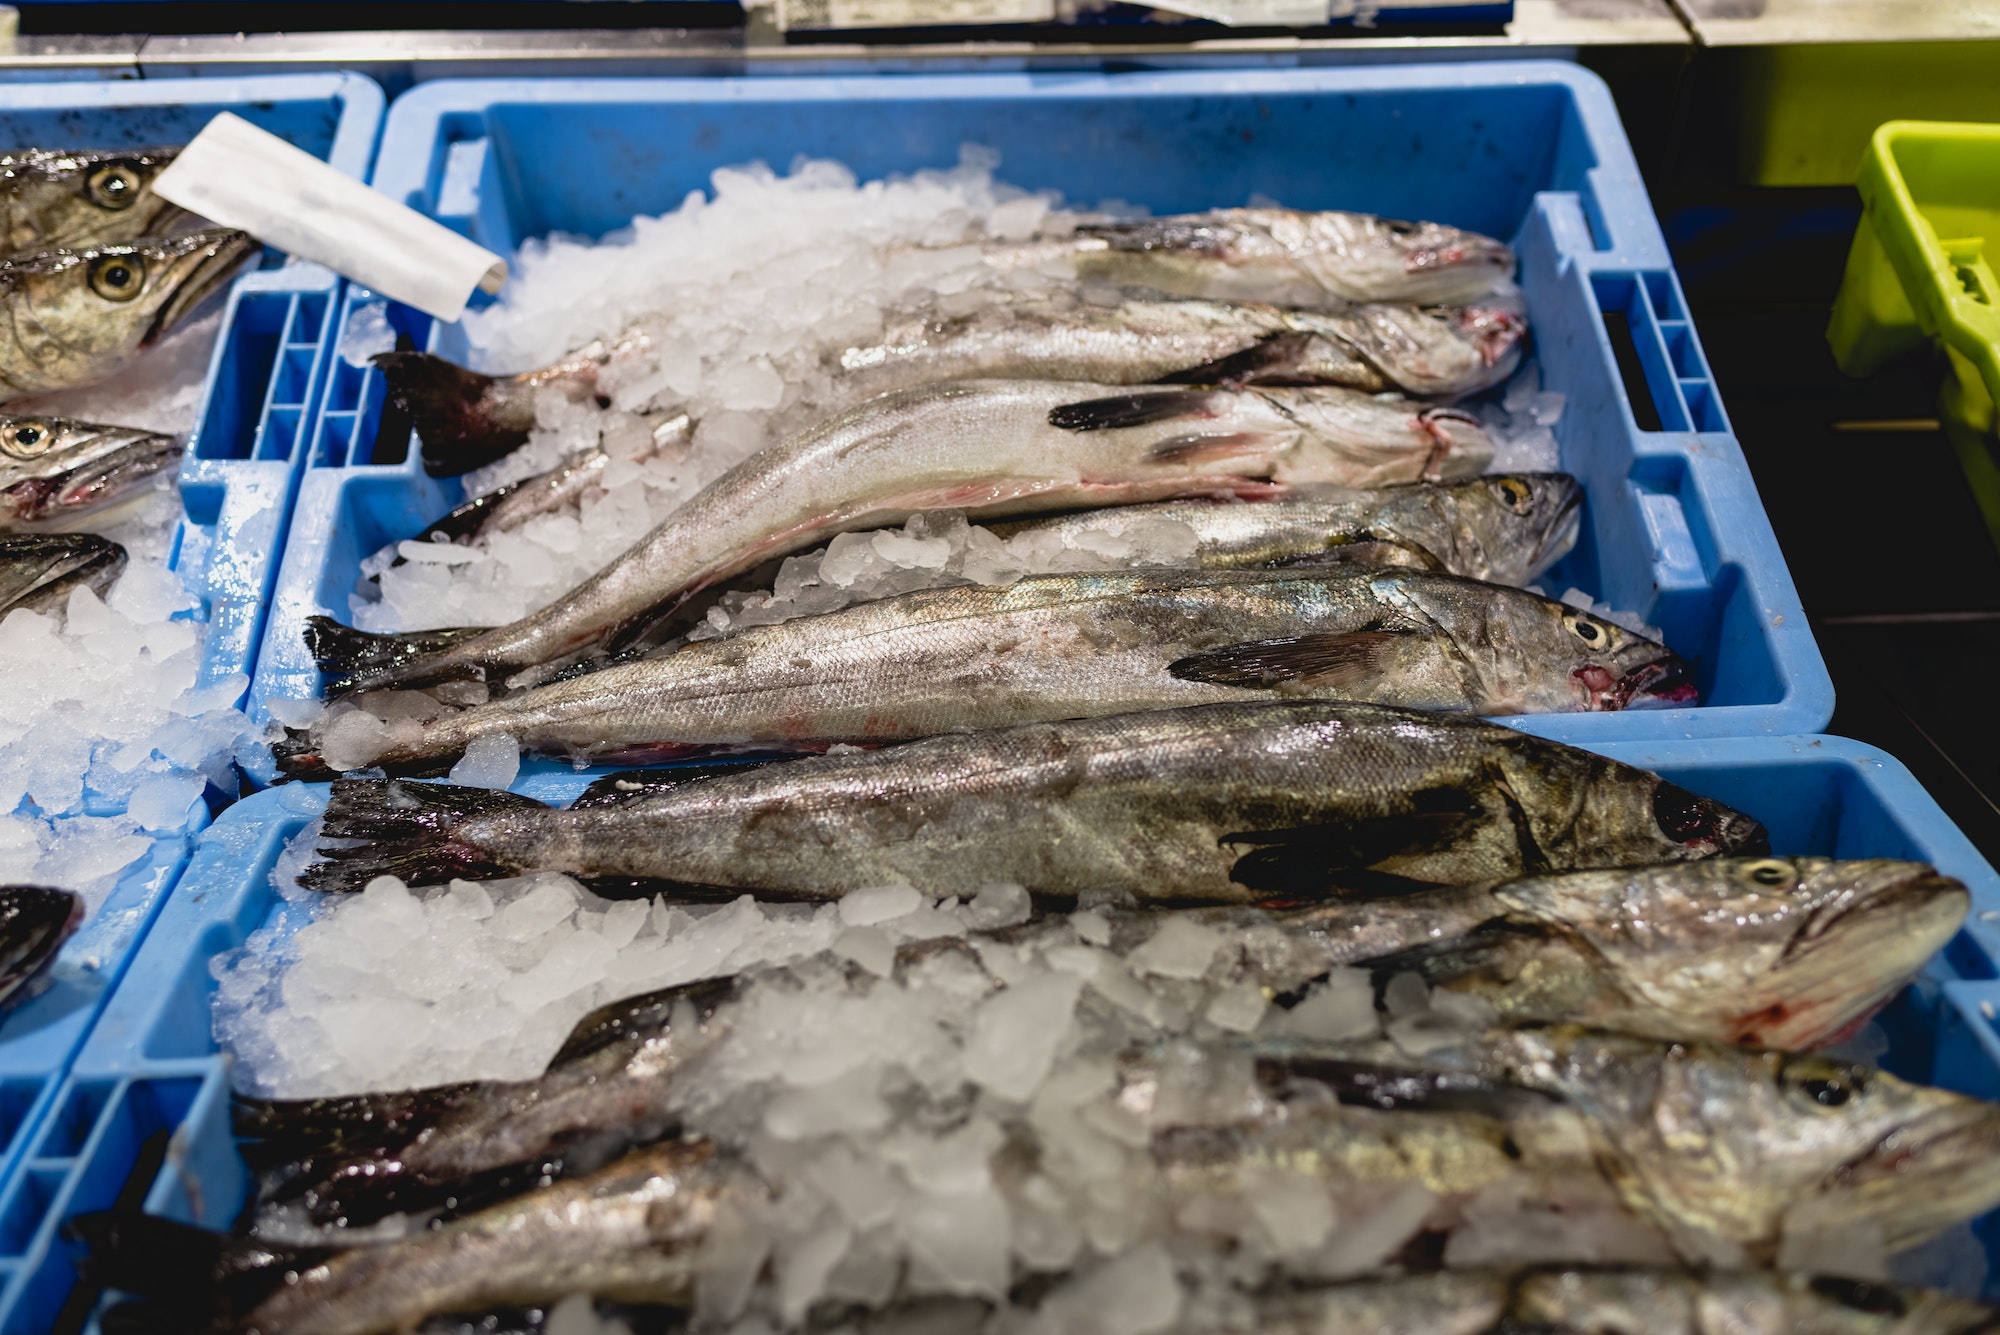 Hake fish in a box with ice in a fishmonger.